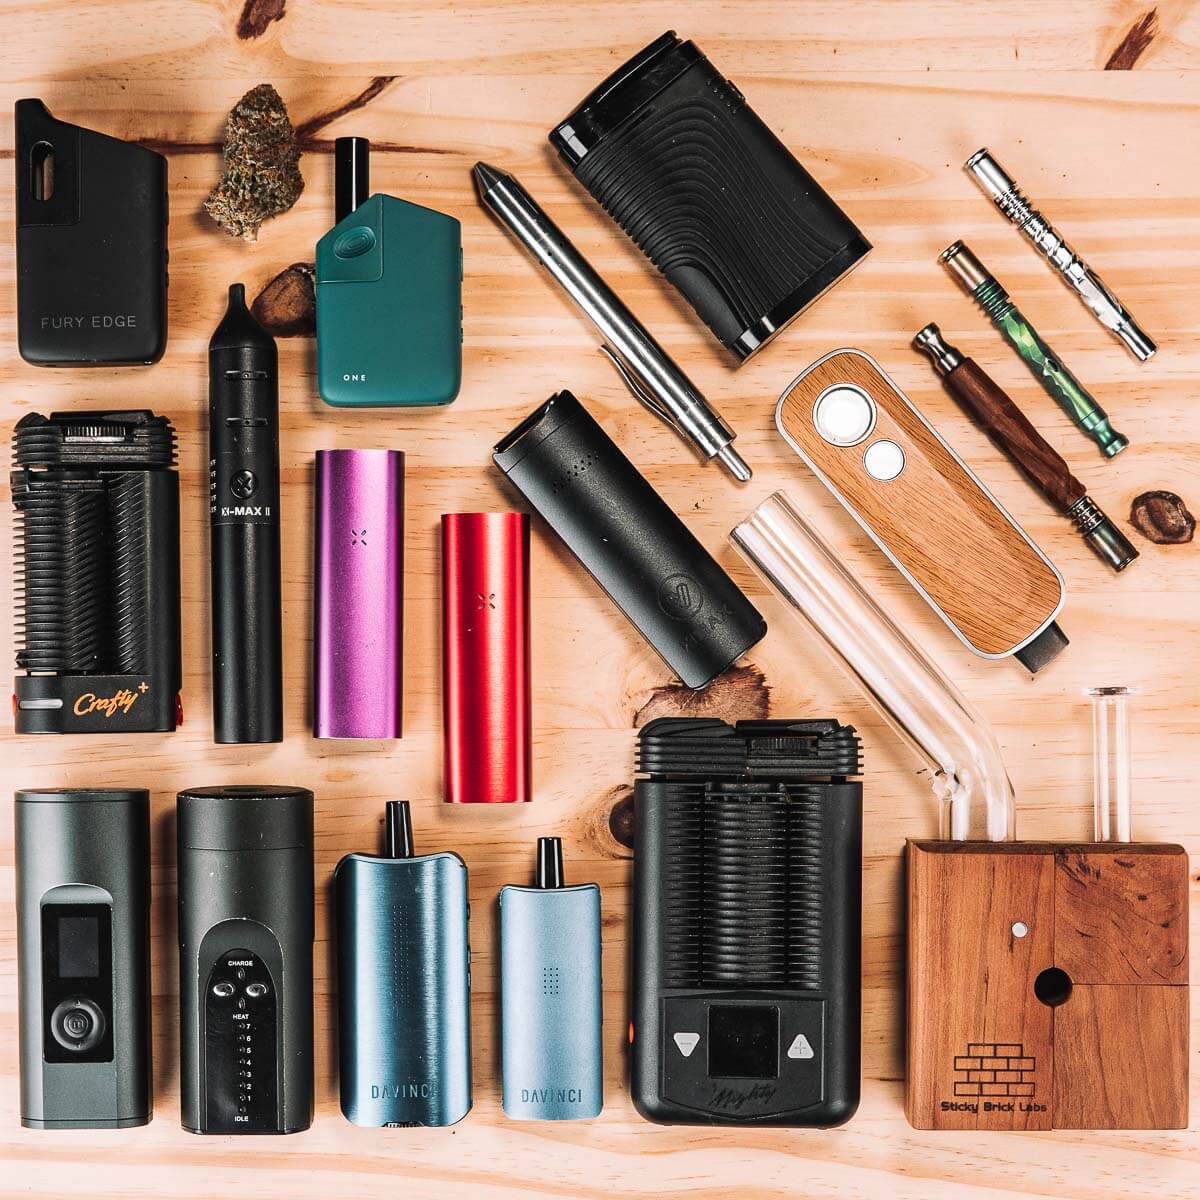 The Best Dry Portable Vaporizers for 2023 - Vaporizer Wizard